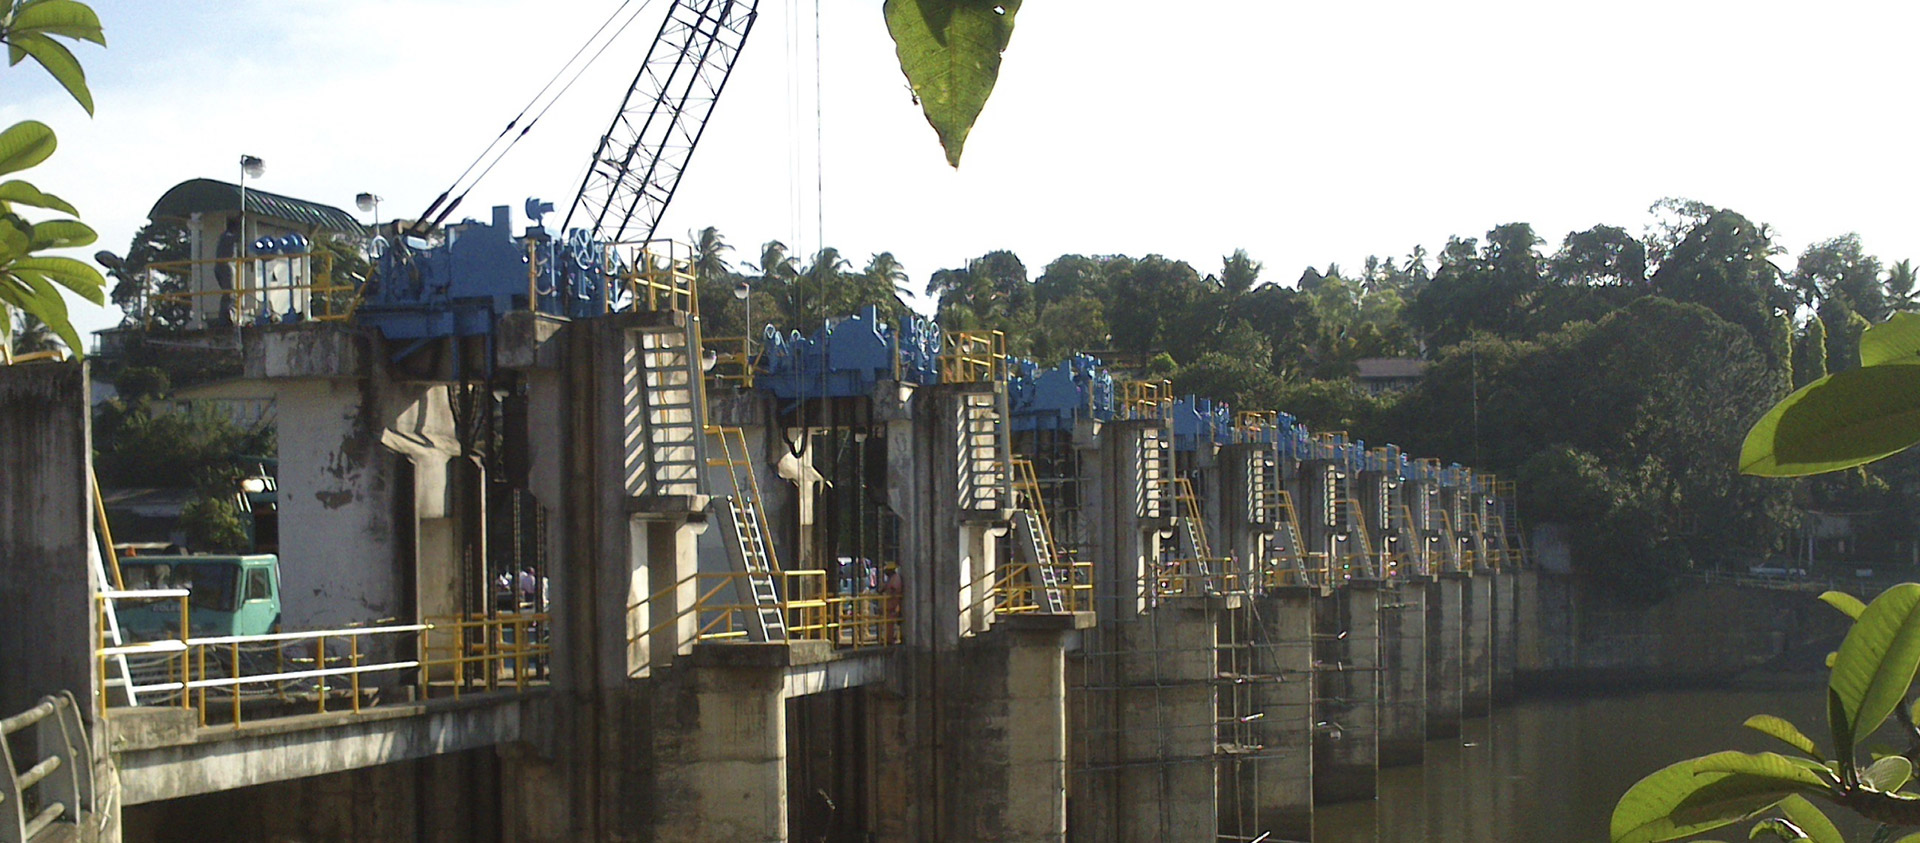 Hydraulic Cylinders for dams and river barriers